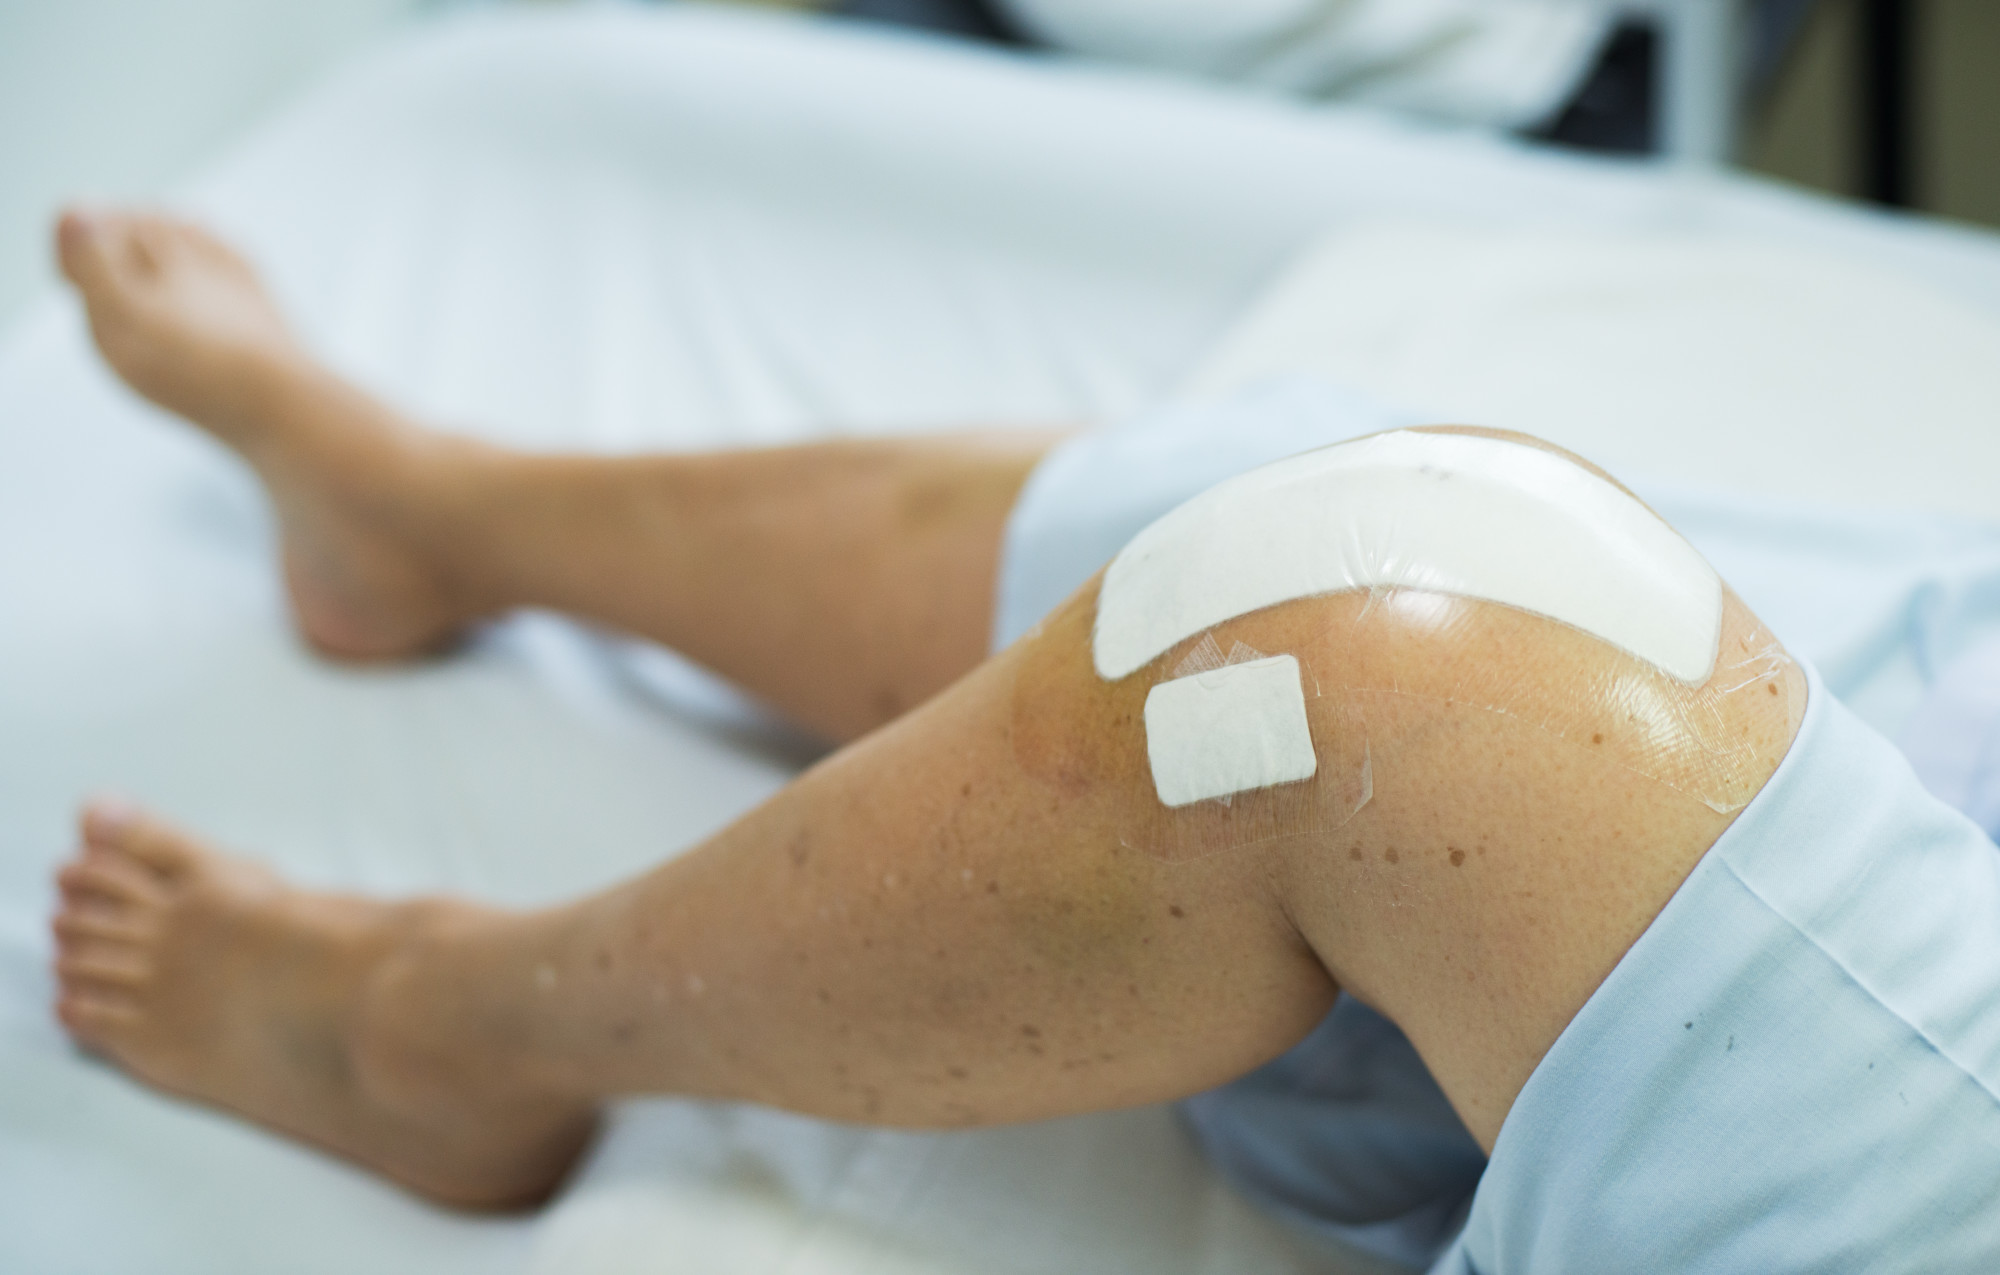 How Does a Knee Surgeon Help With a Personal Injury Case?